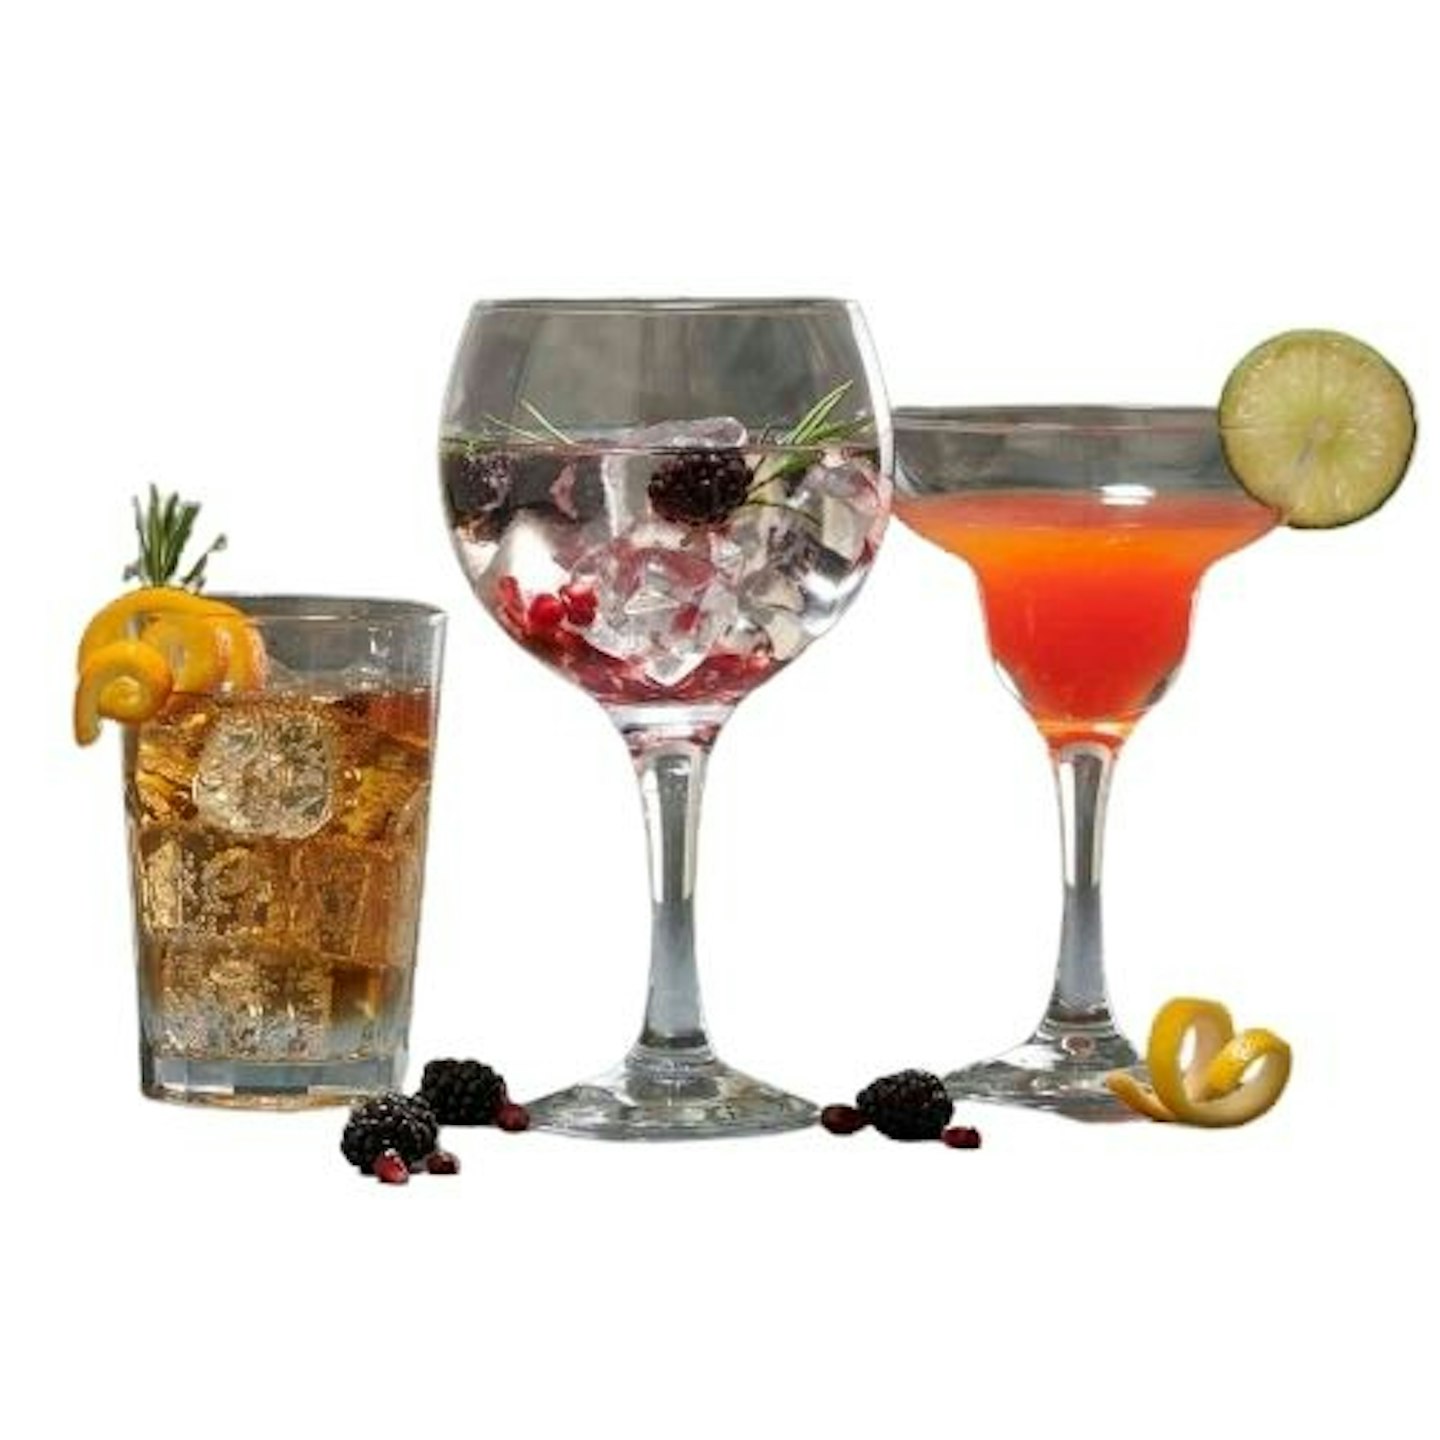 Image: Three cocktail glasses, filled with drinks, ice and garnished with sliced fruit.